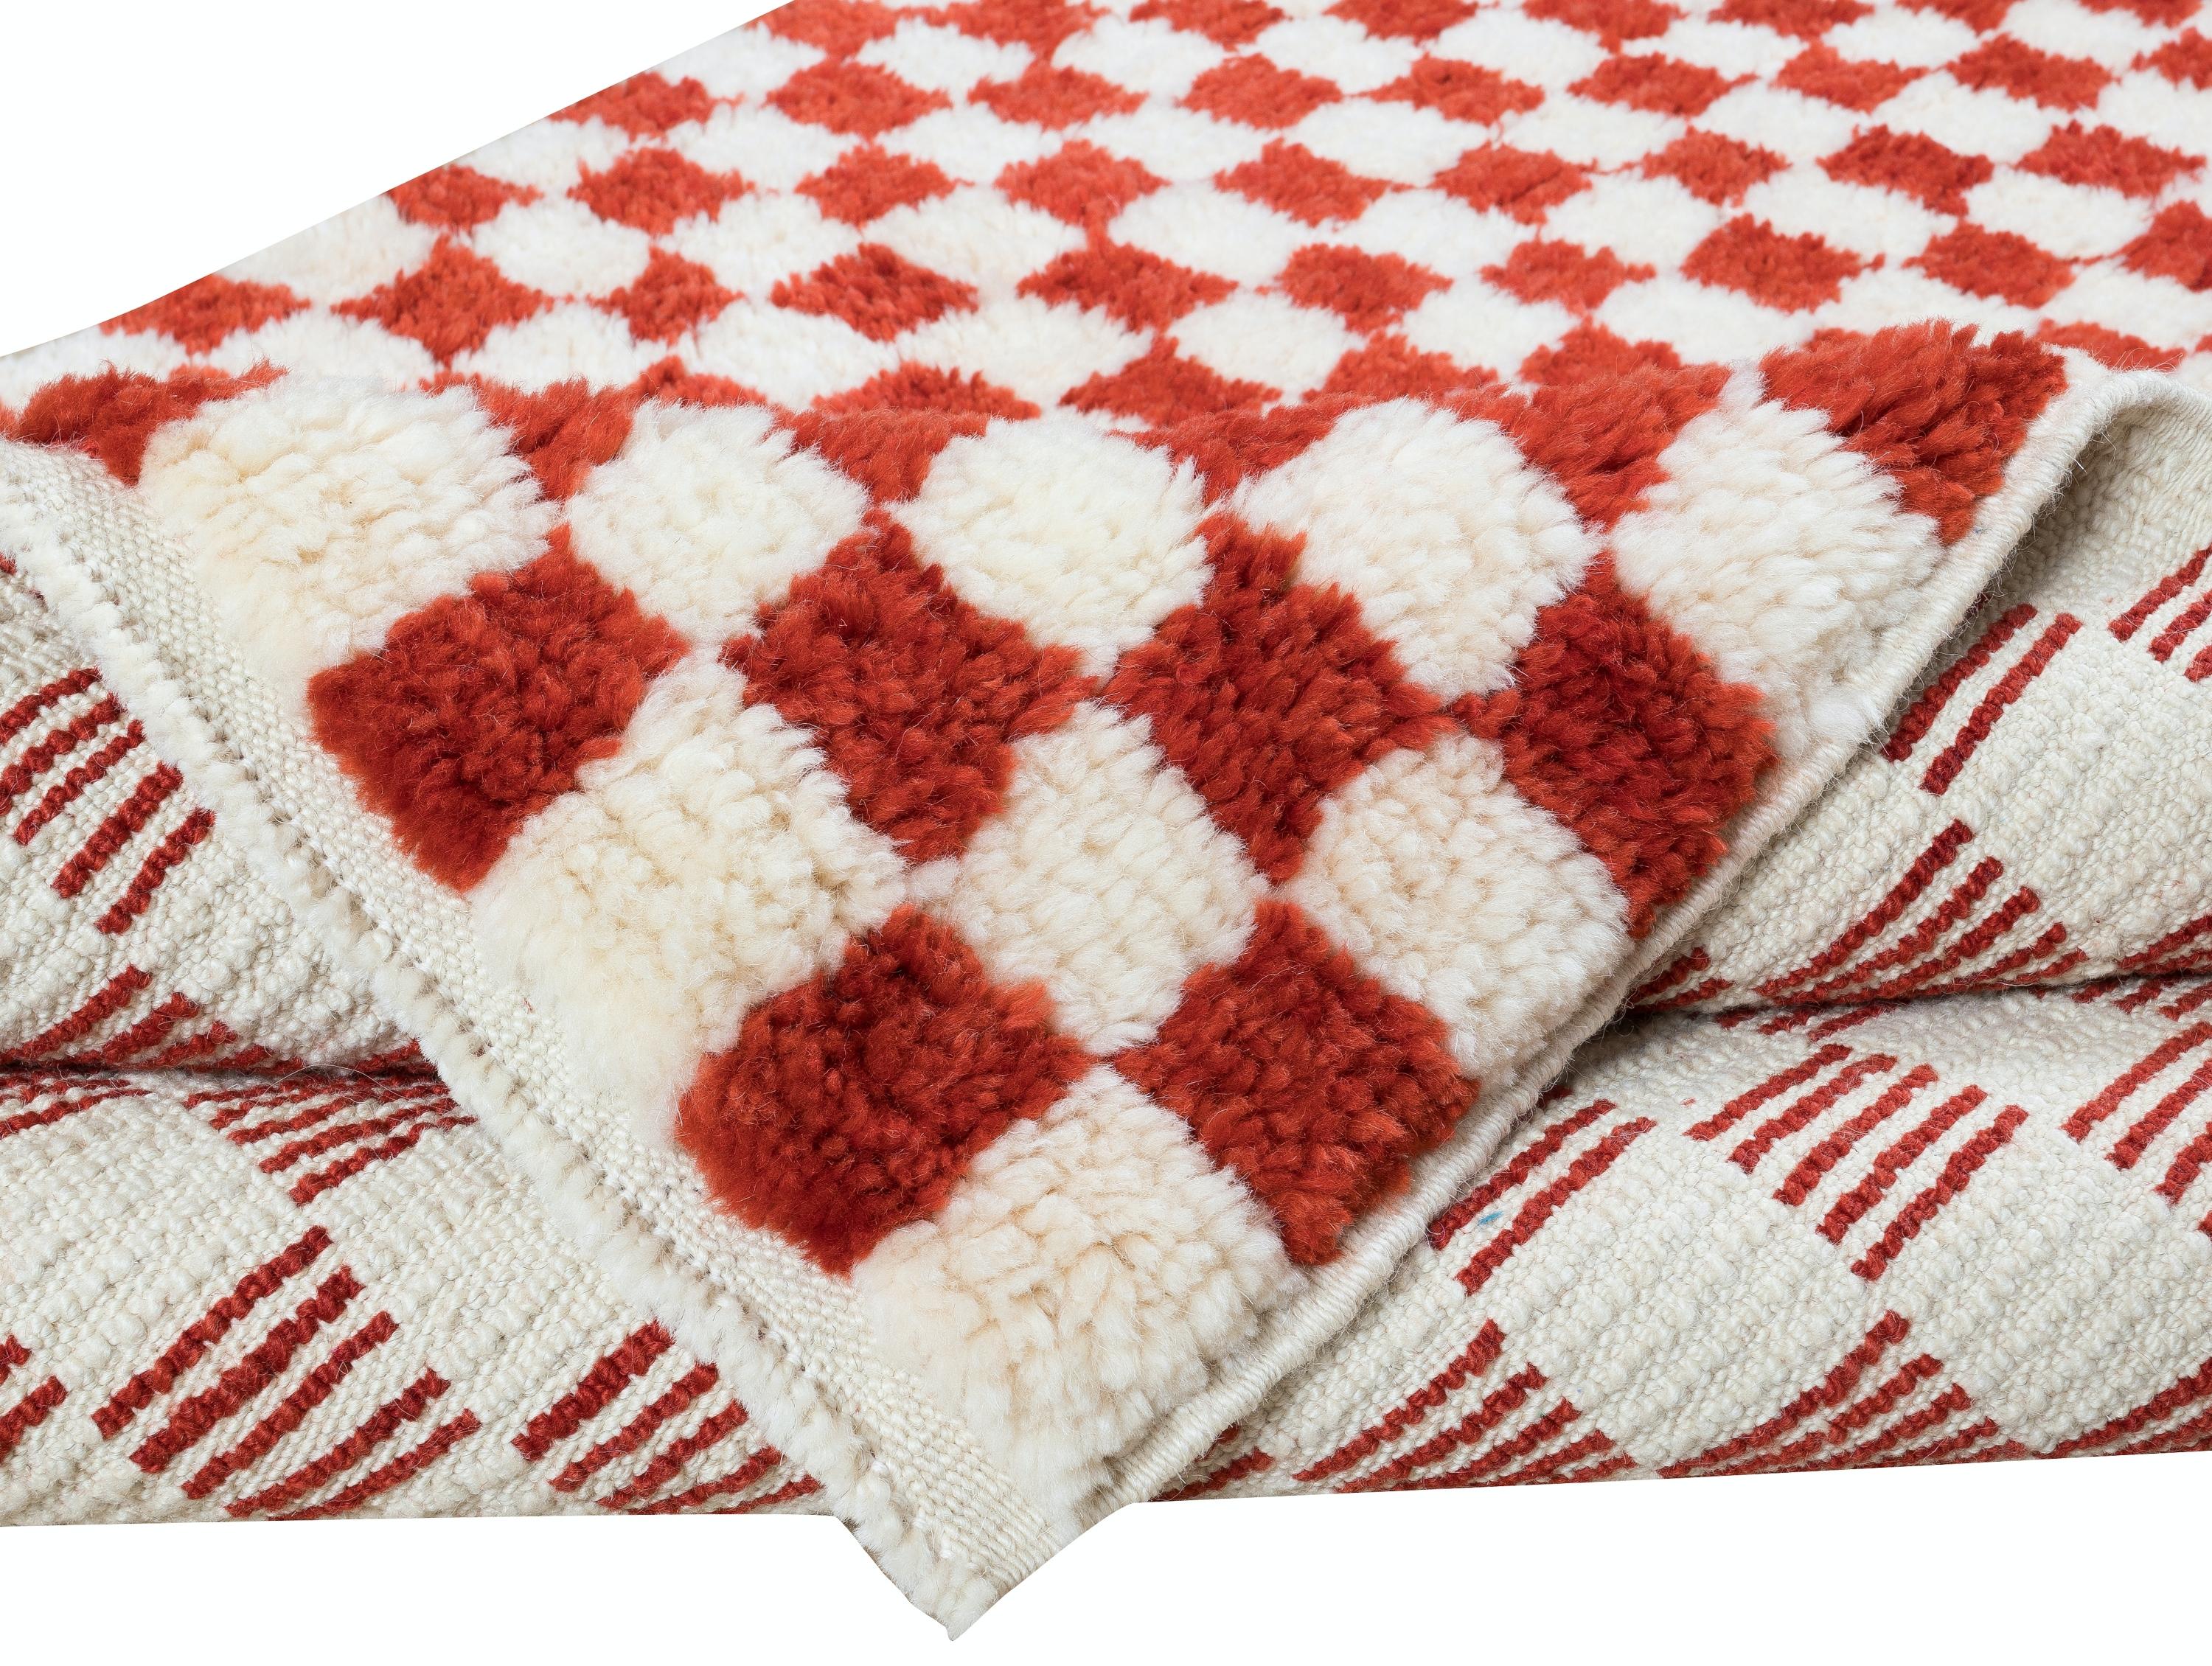 A custom, handmade Tulu rug made from 100% Hand-Spun Wool of finest quality. It features a simple checkered design in cream and red. Measures: 4 x 6

The rug is available as seen or it can be CUSTOM-PRODUCED in any Design, Size, Color Combination